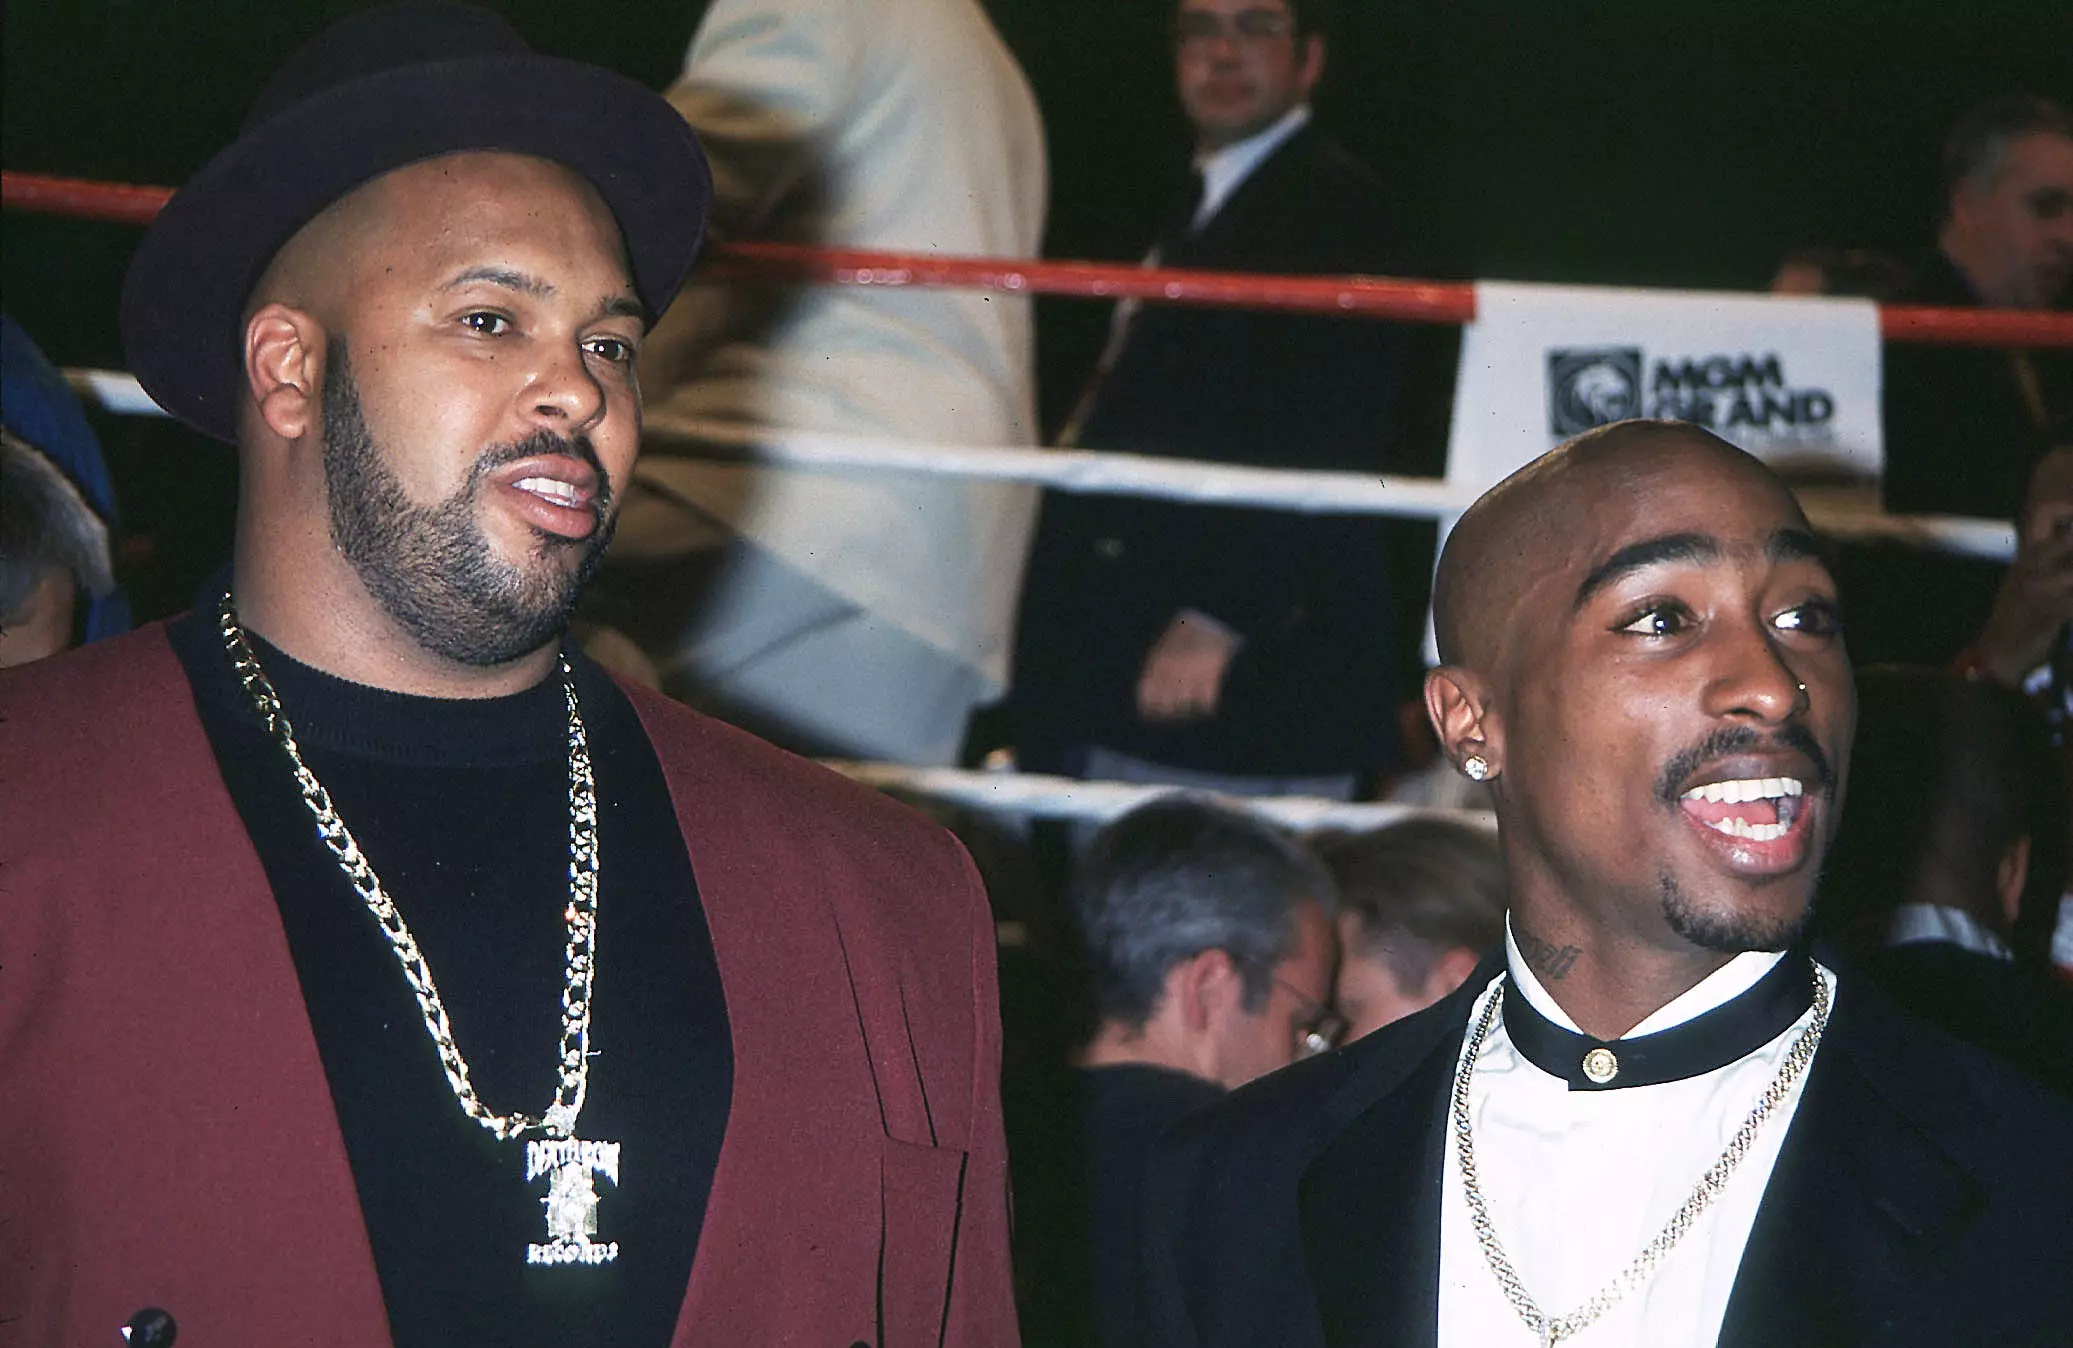 Suge Knight (L) and Tupac Shakur (R) at the MGM Grand Arena on 7 September 1996 shortly before he was shot.